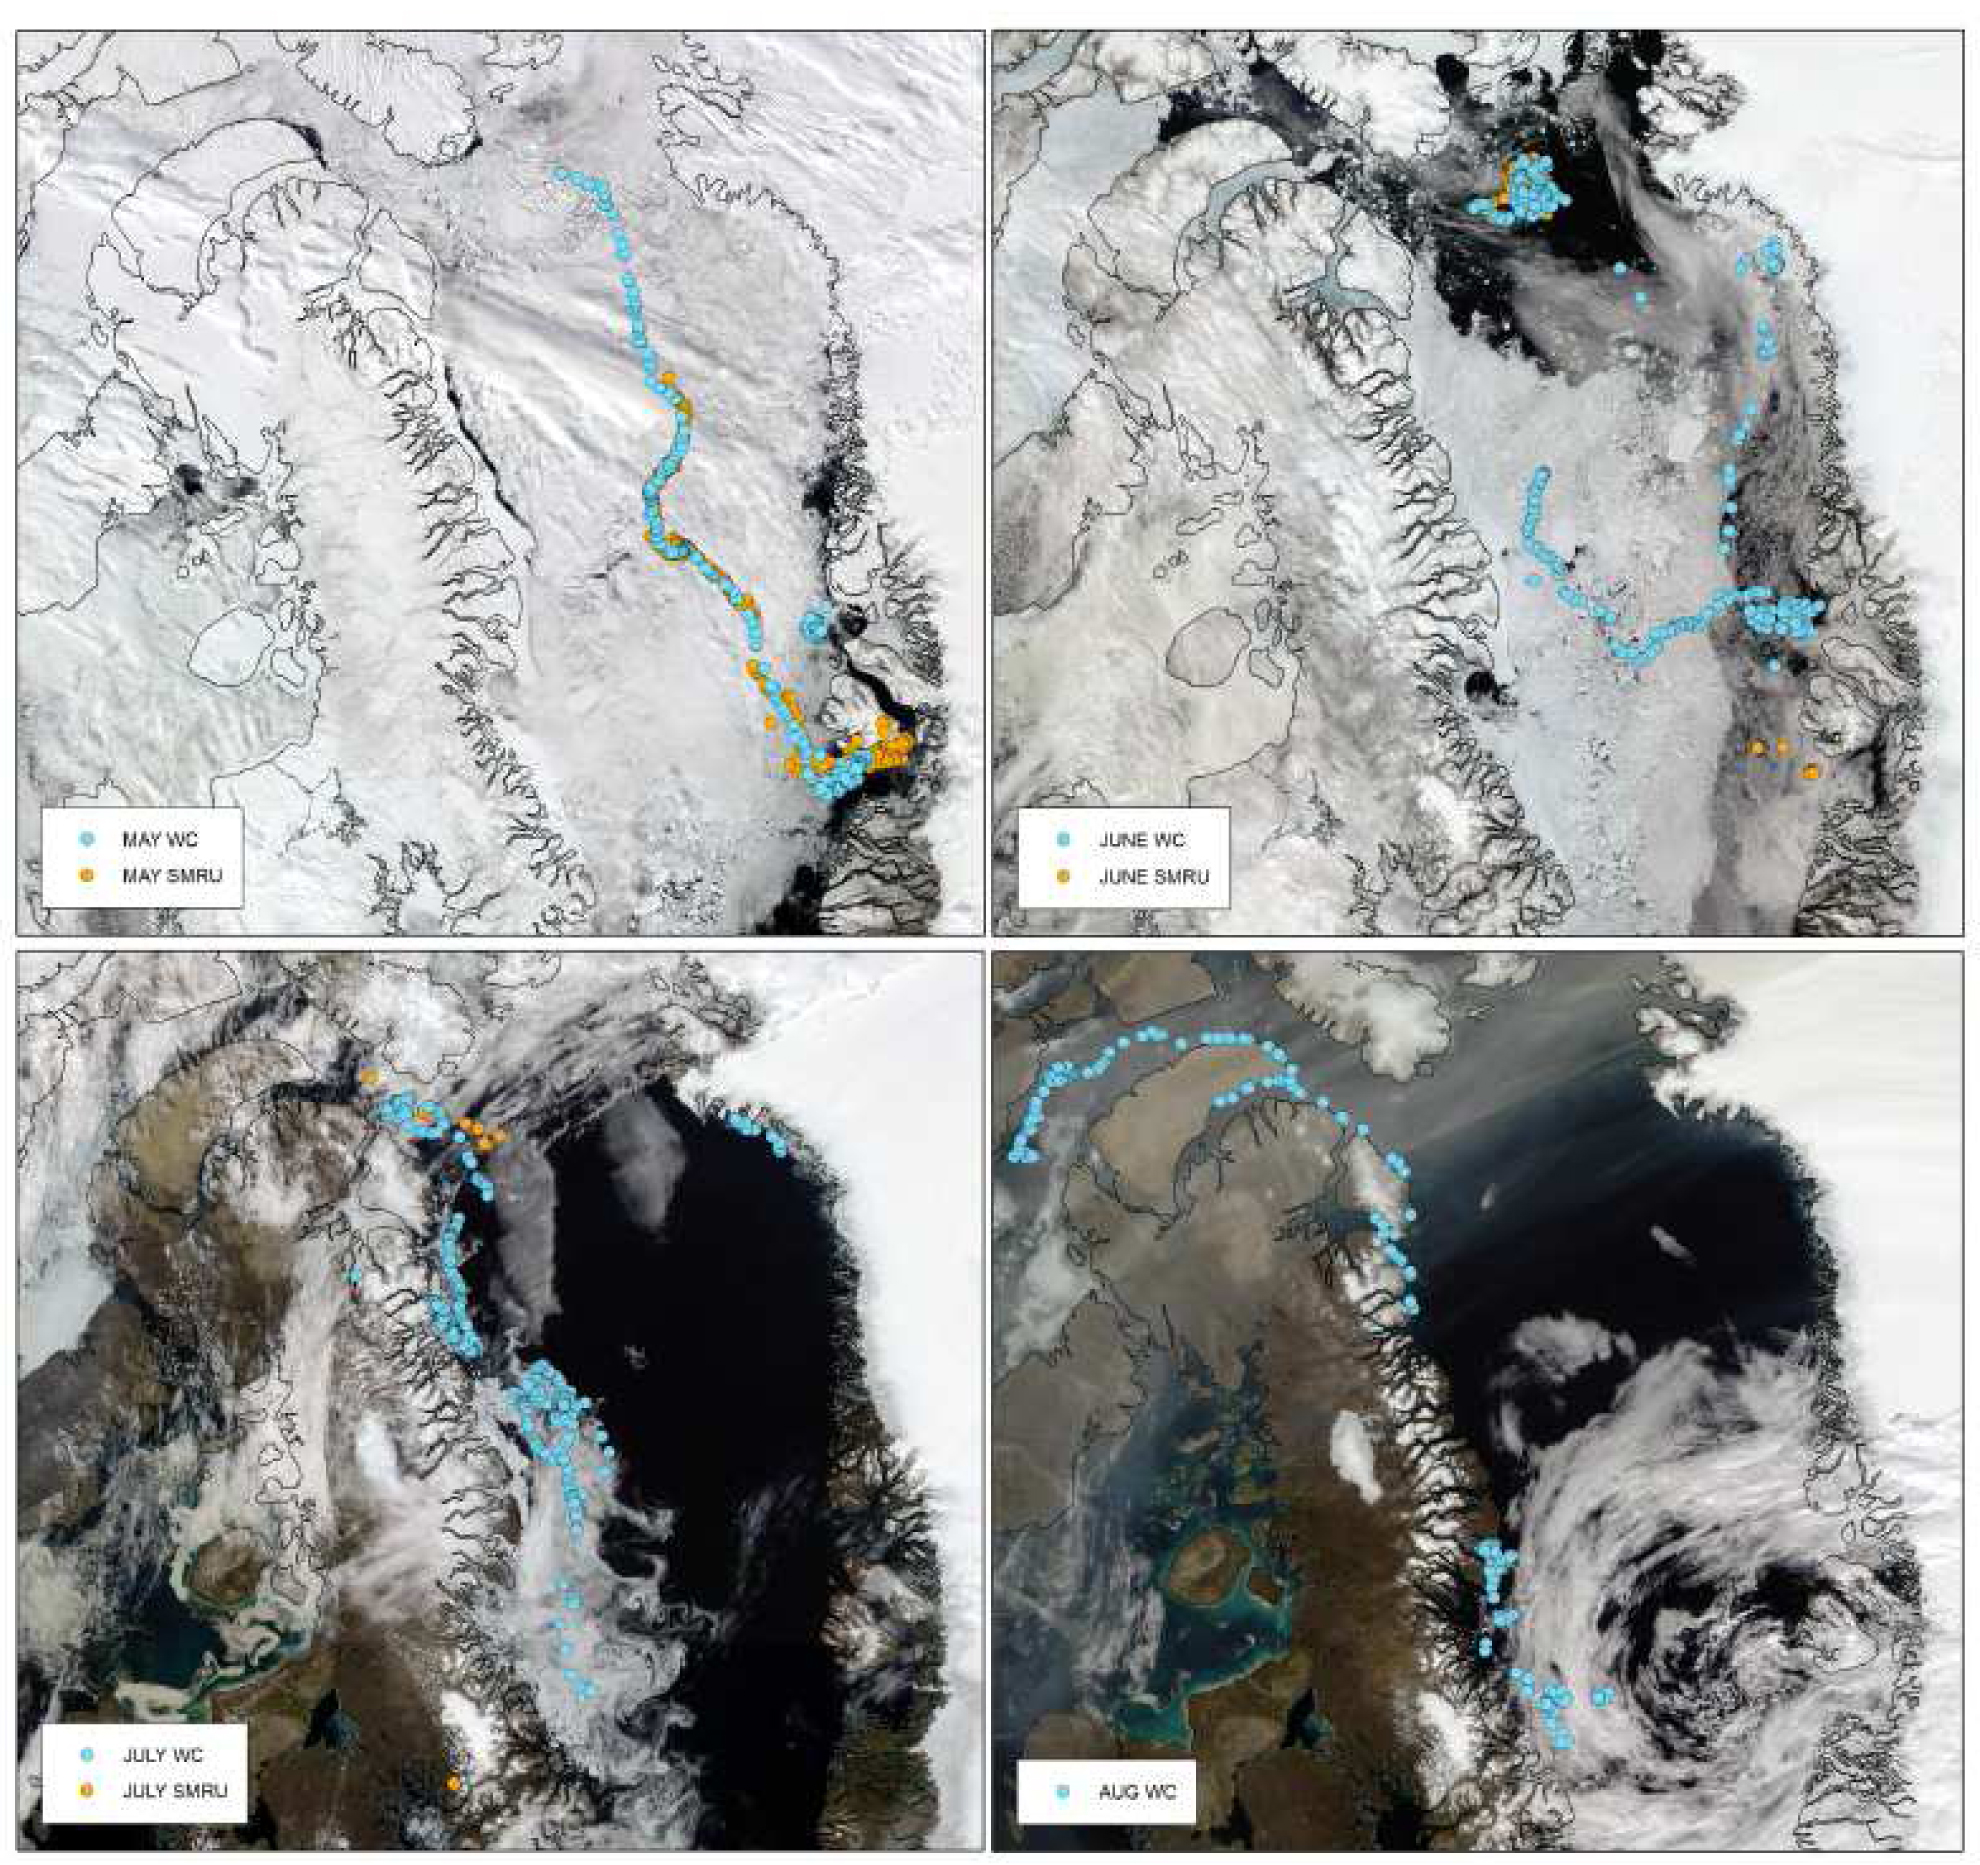 Satellite images showing the sea ice cover in the area of the study and the bowhead whale tracks, month by month from May to August, with the two type of tags attached to the same whale. (Credit [Teilmann et al. 2020])